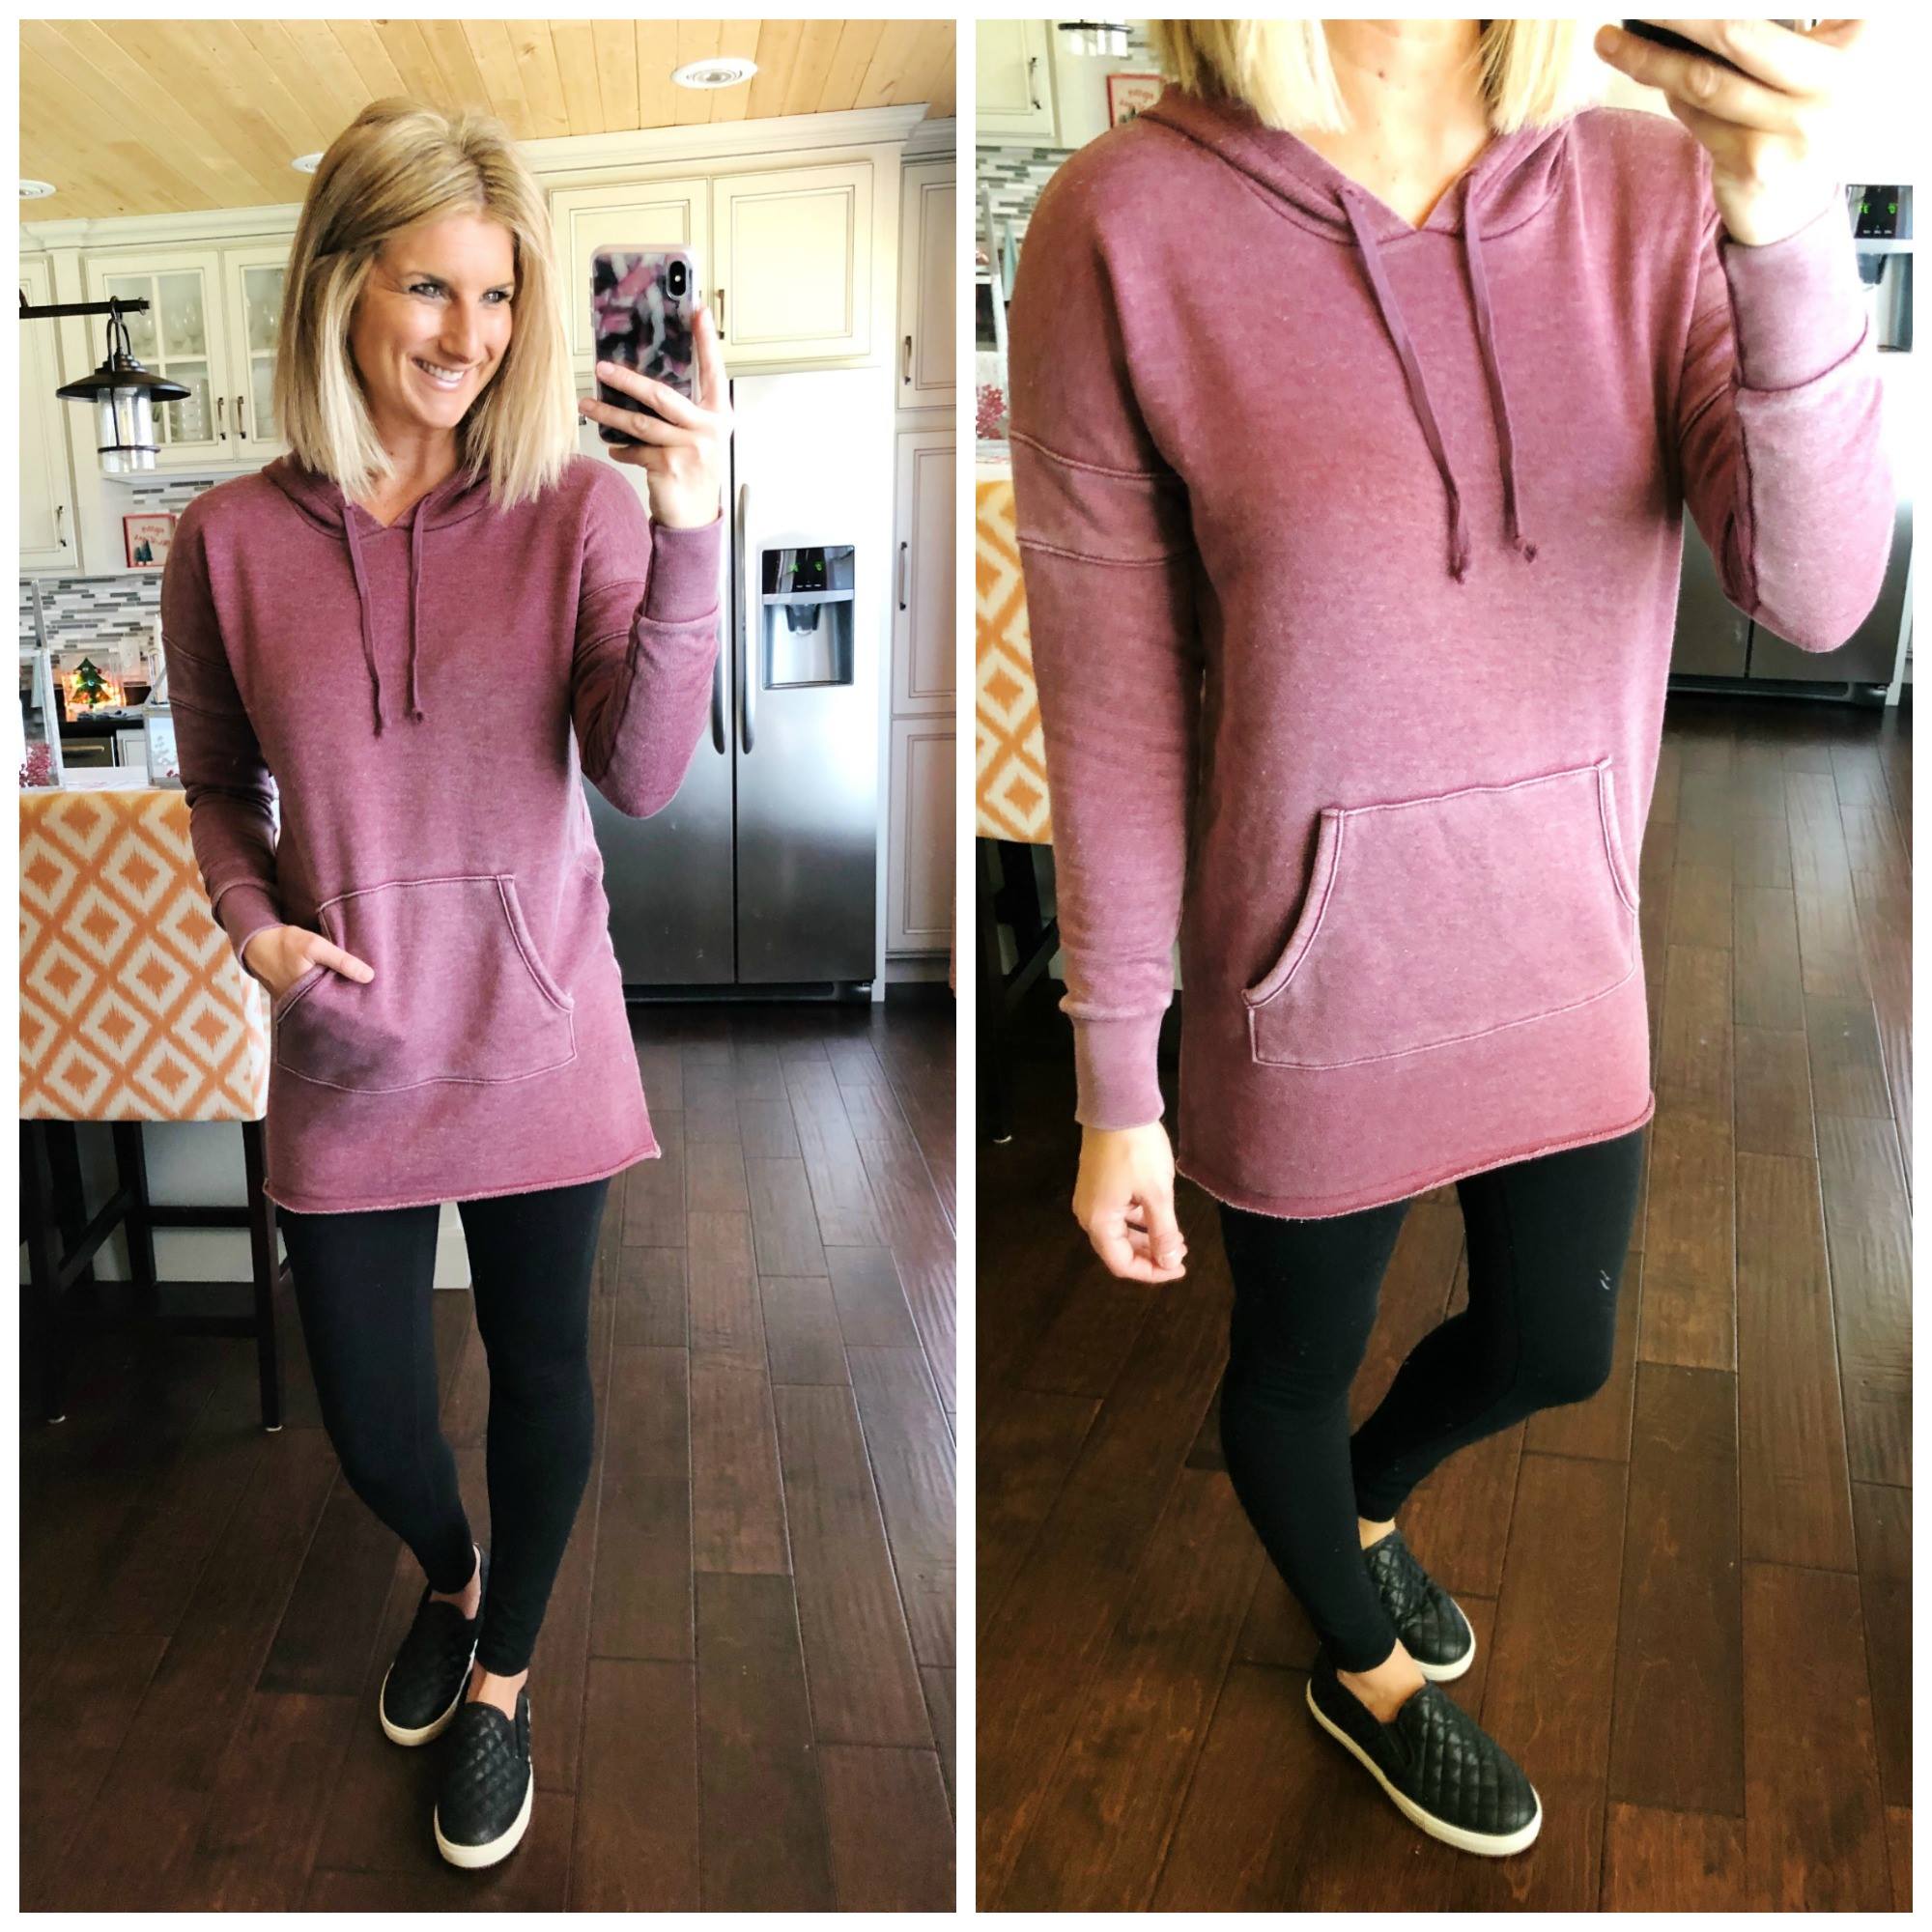 How to Wear a Hooded Tunic and Leggings